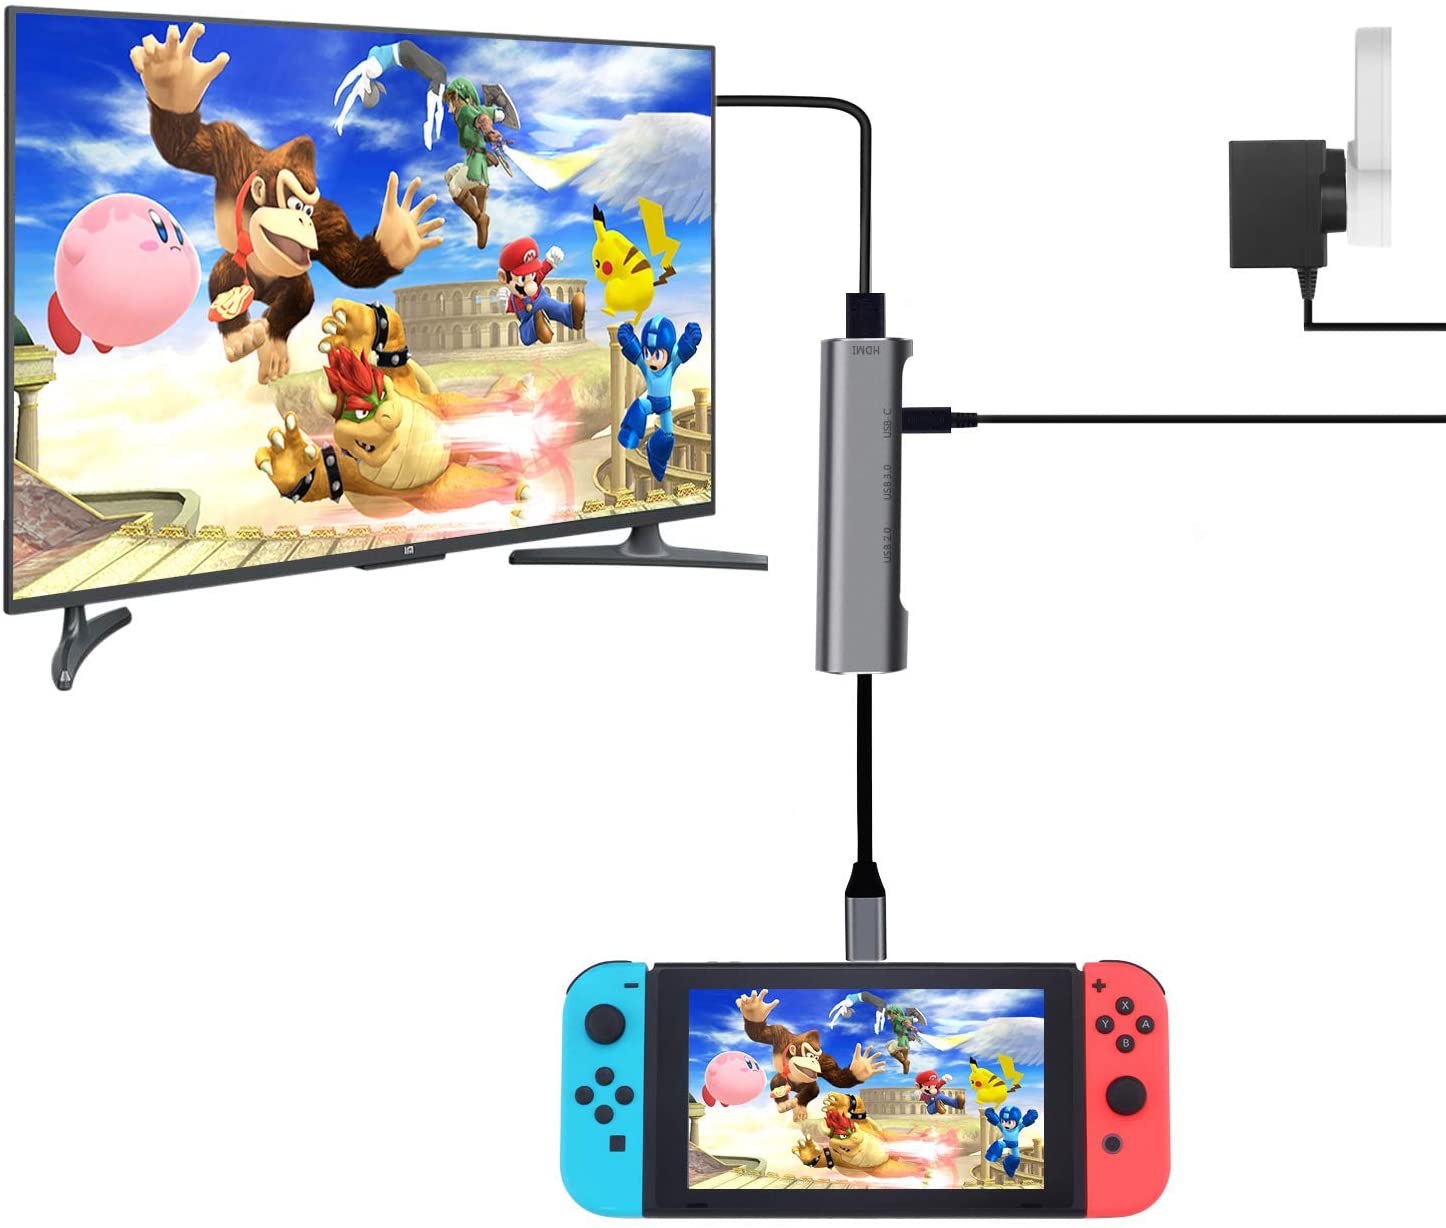 How to play Nintendo switch Animal Crossing on TV with QGeeM 5 in 1 hub - QGeeM